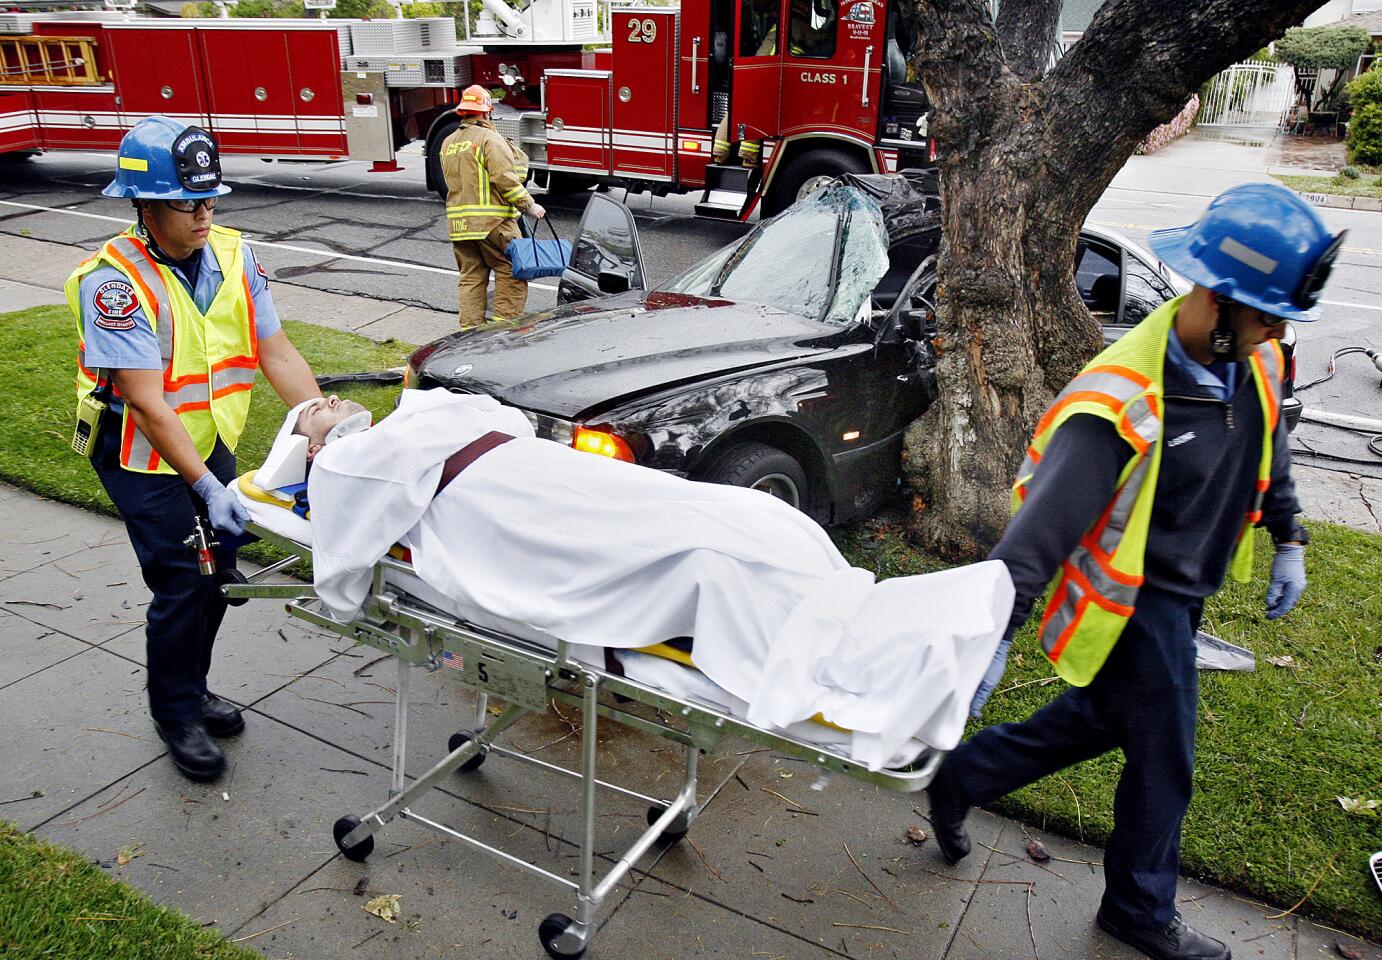 The driver of a wrecked vehicle in the background is taken to an ambulance on Friday, April 13, 2012.